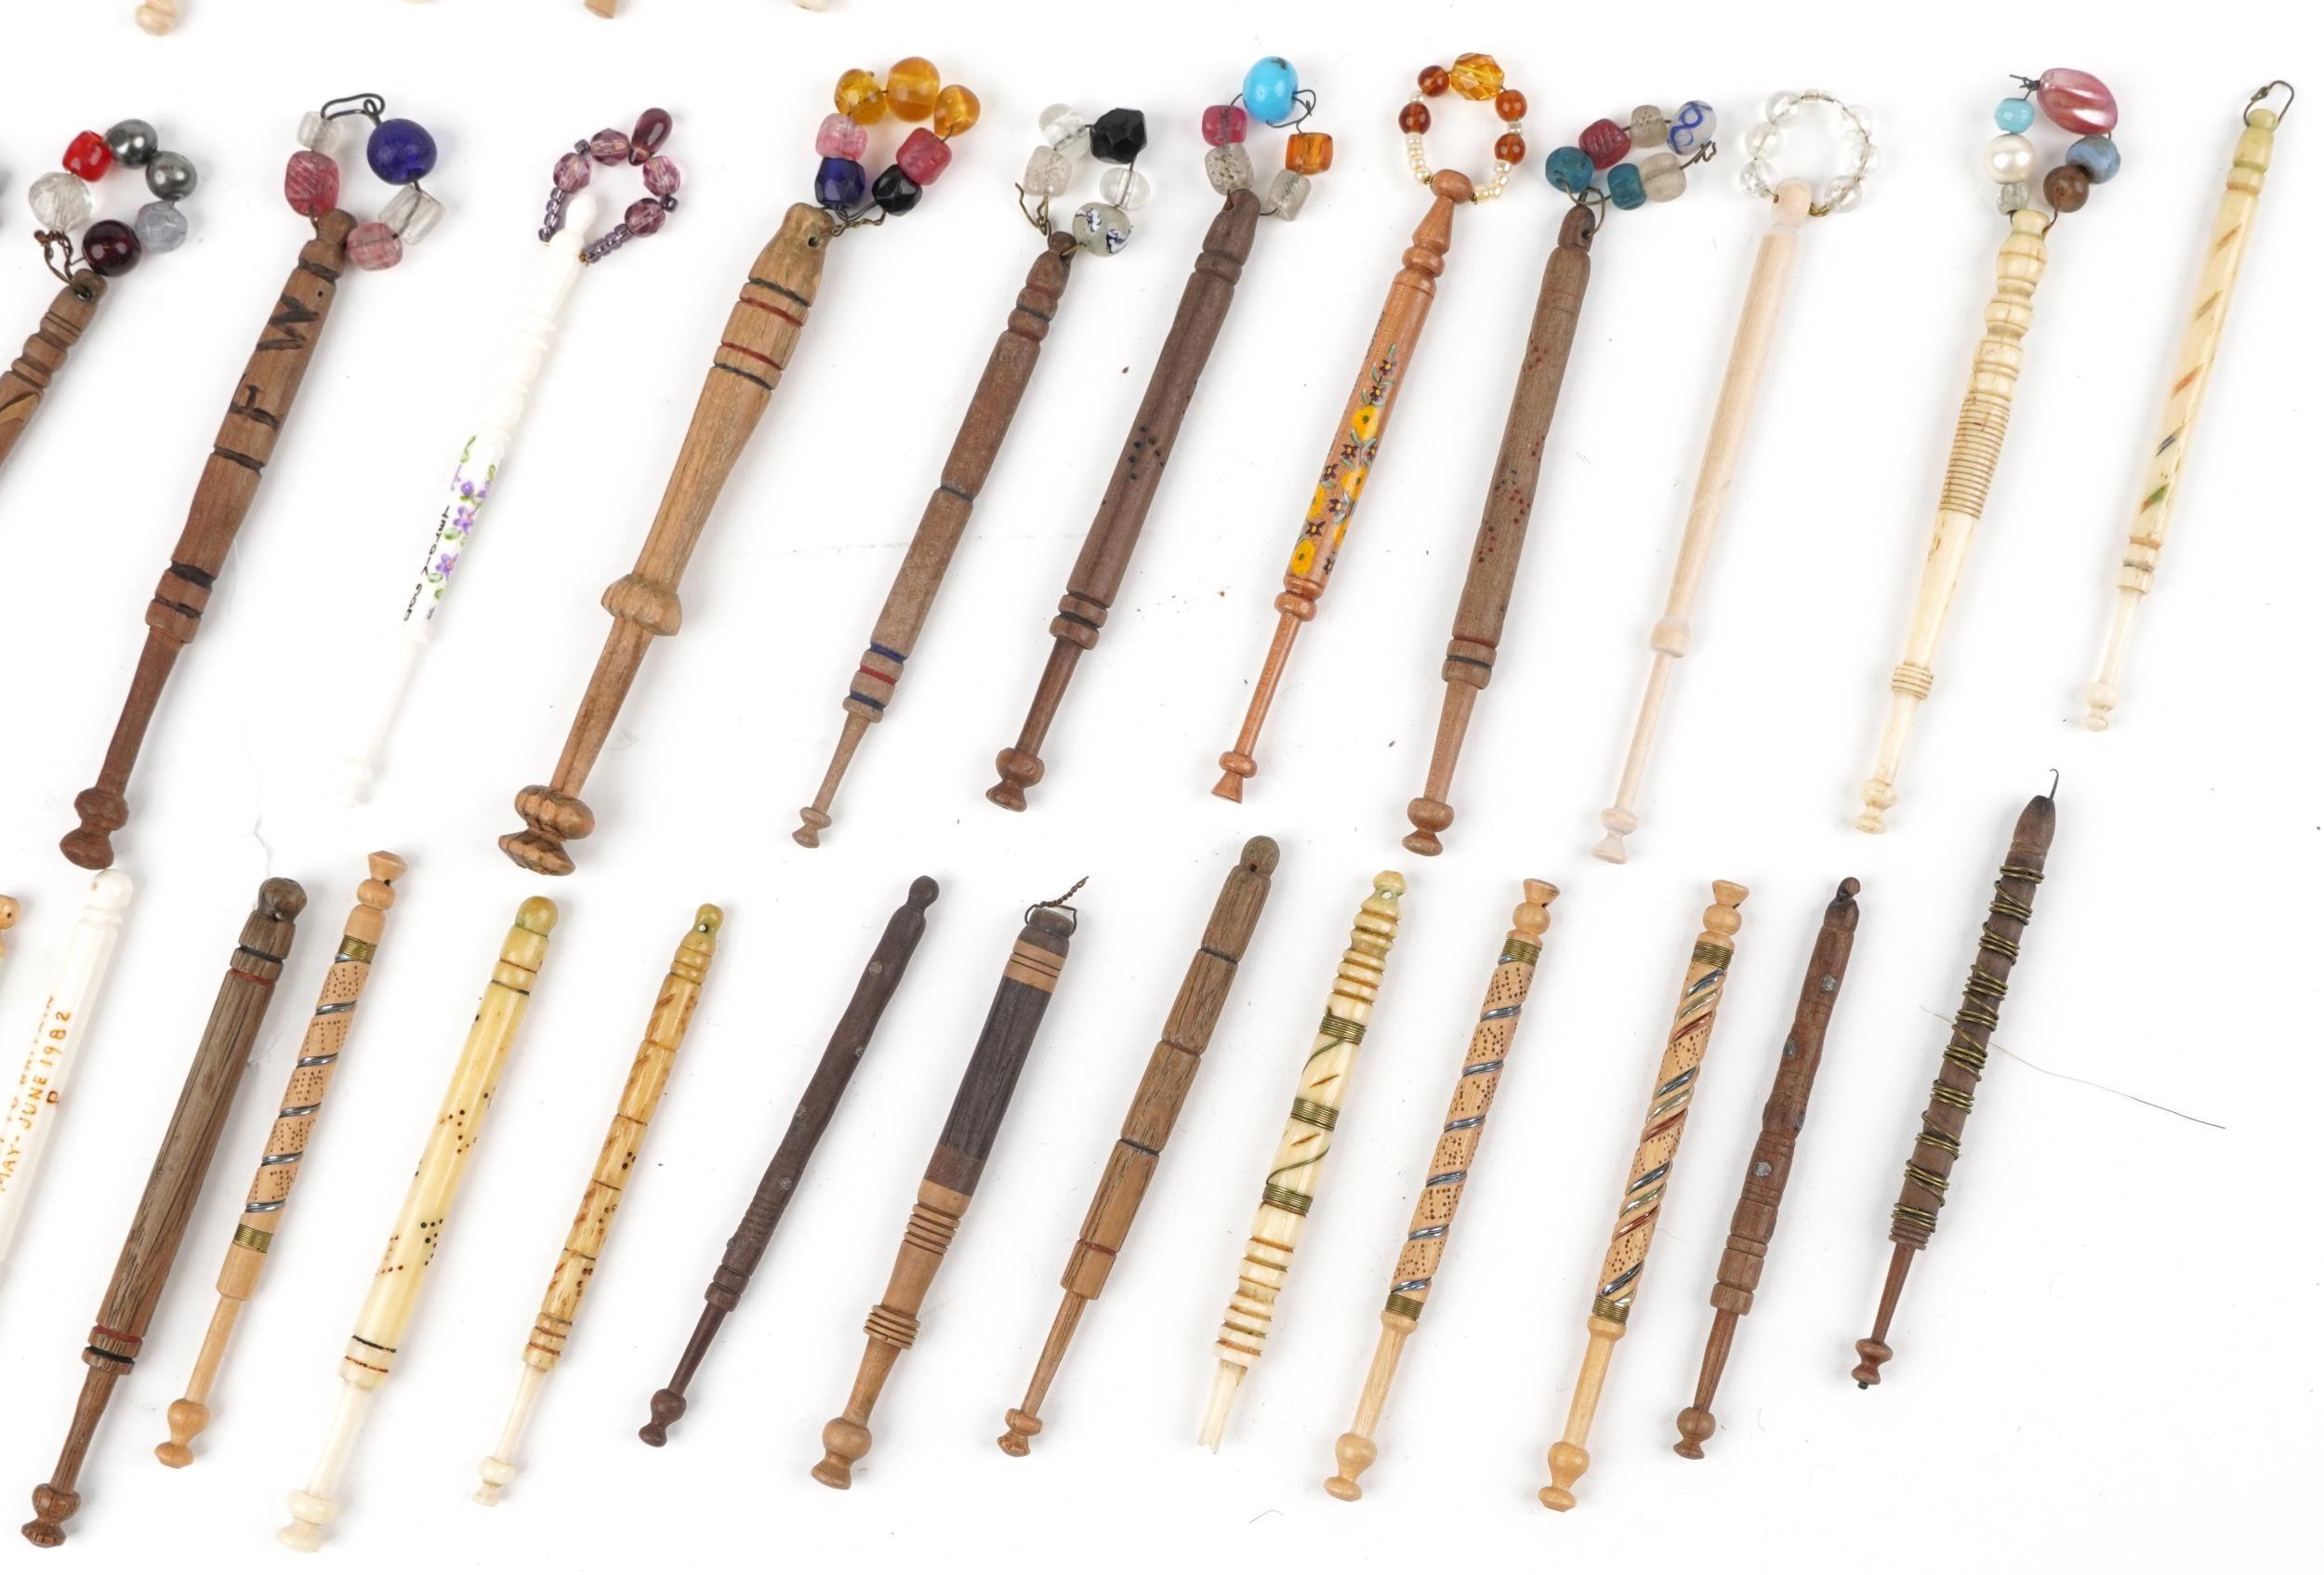 Collection of sewing interest carved bone and hardwood lace making bobbins with beads - Image 5 of 5